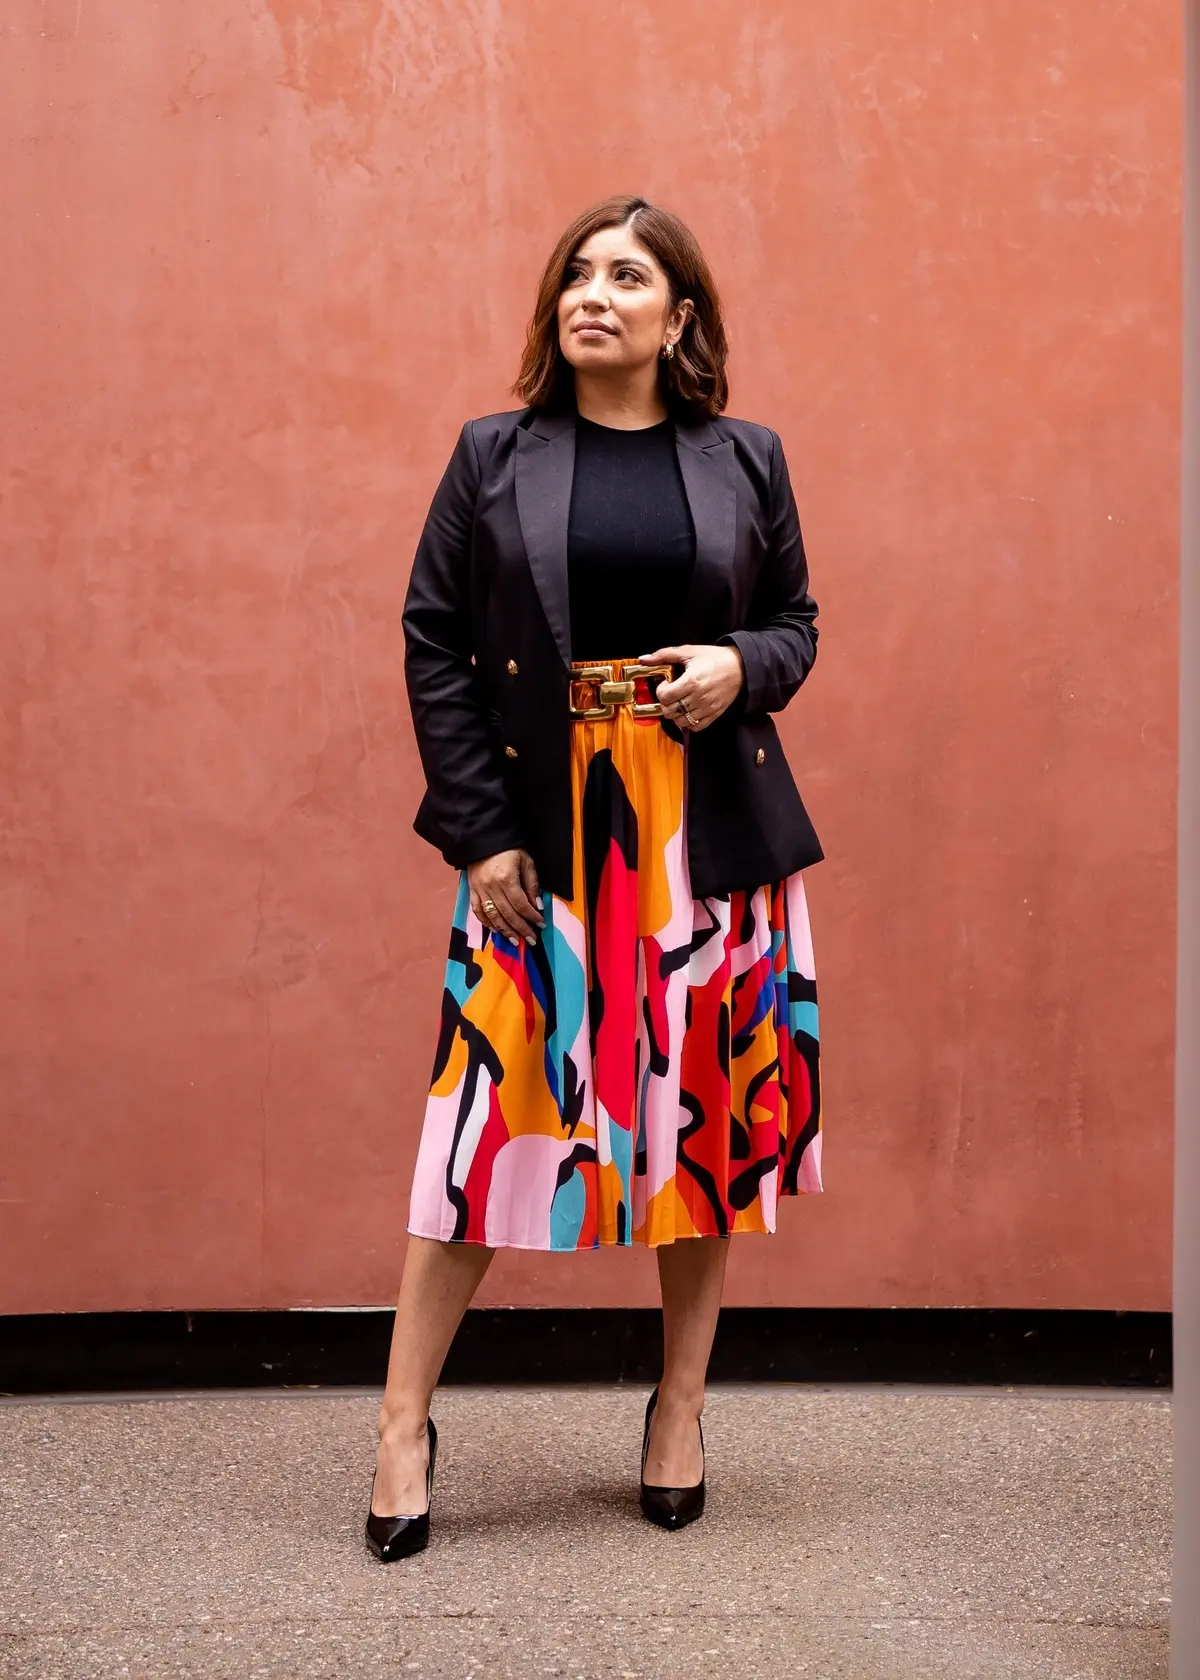 bright colored patterned pleated skirt paired with black blazer, top and pumps